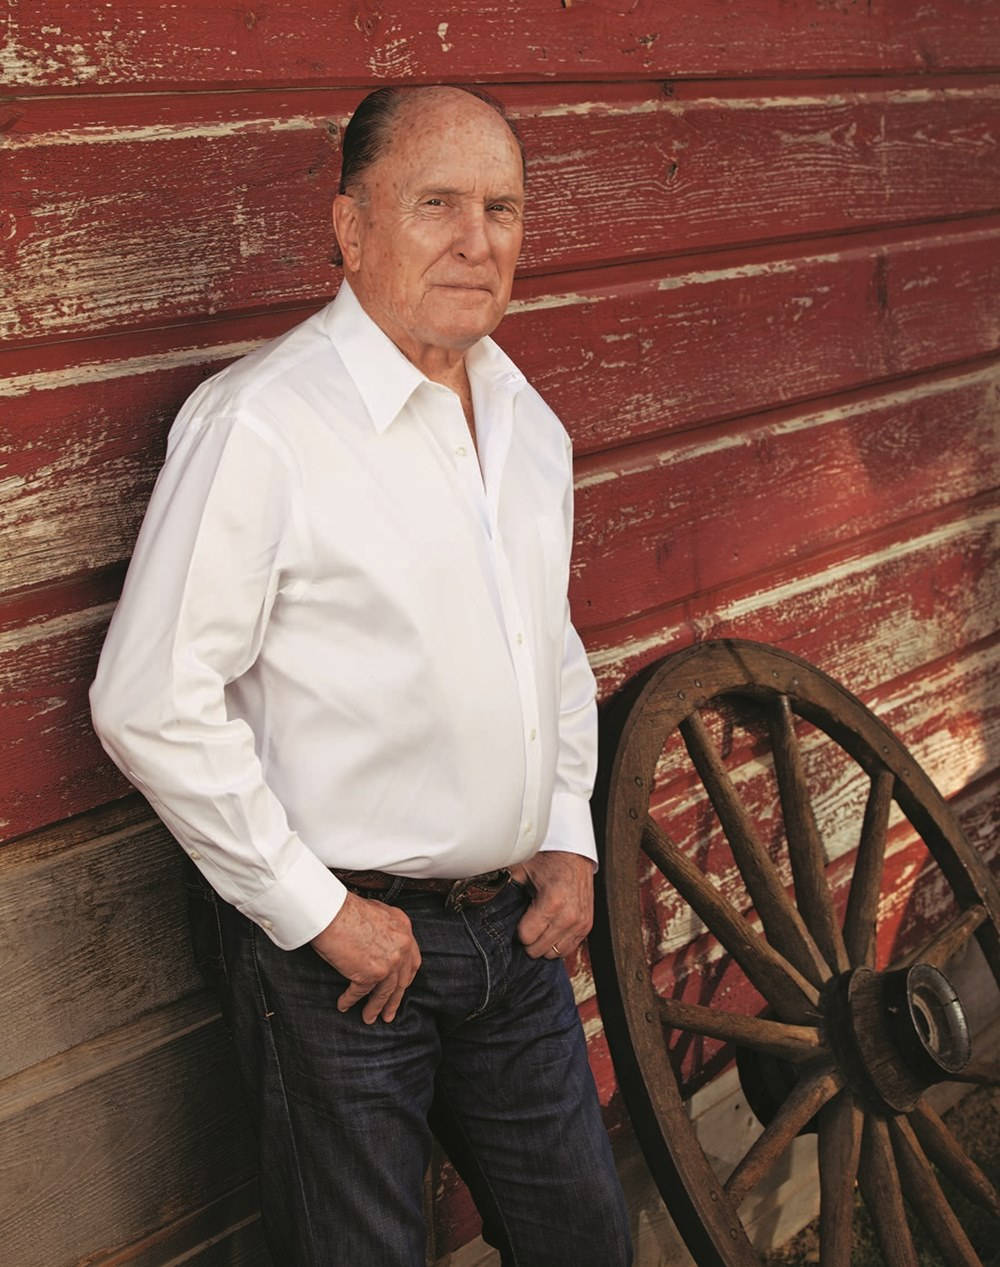 Renowned Actor Robert Duvall in a Cowboys and Indians Magazine Photoshoot Wallpaper